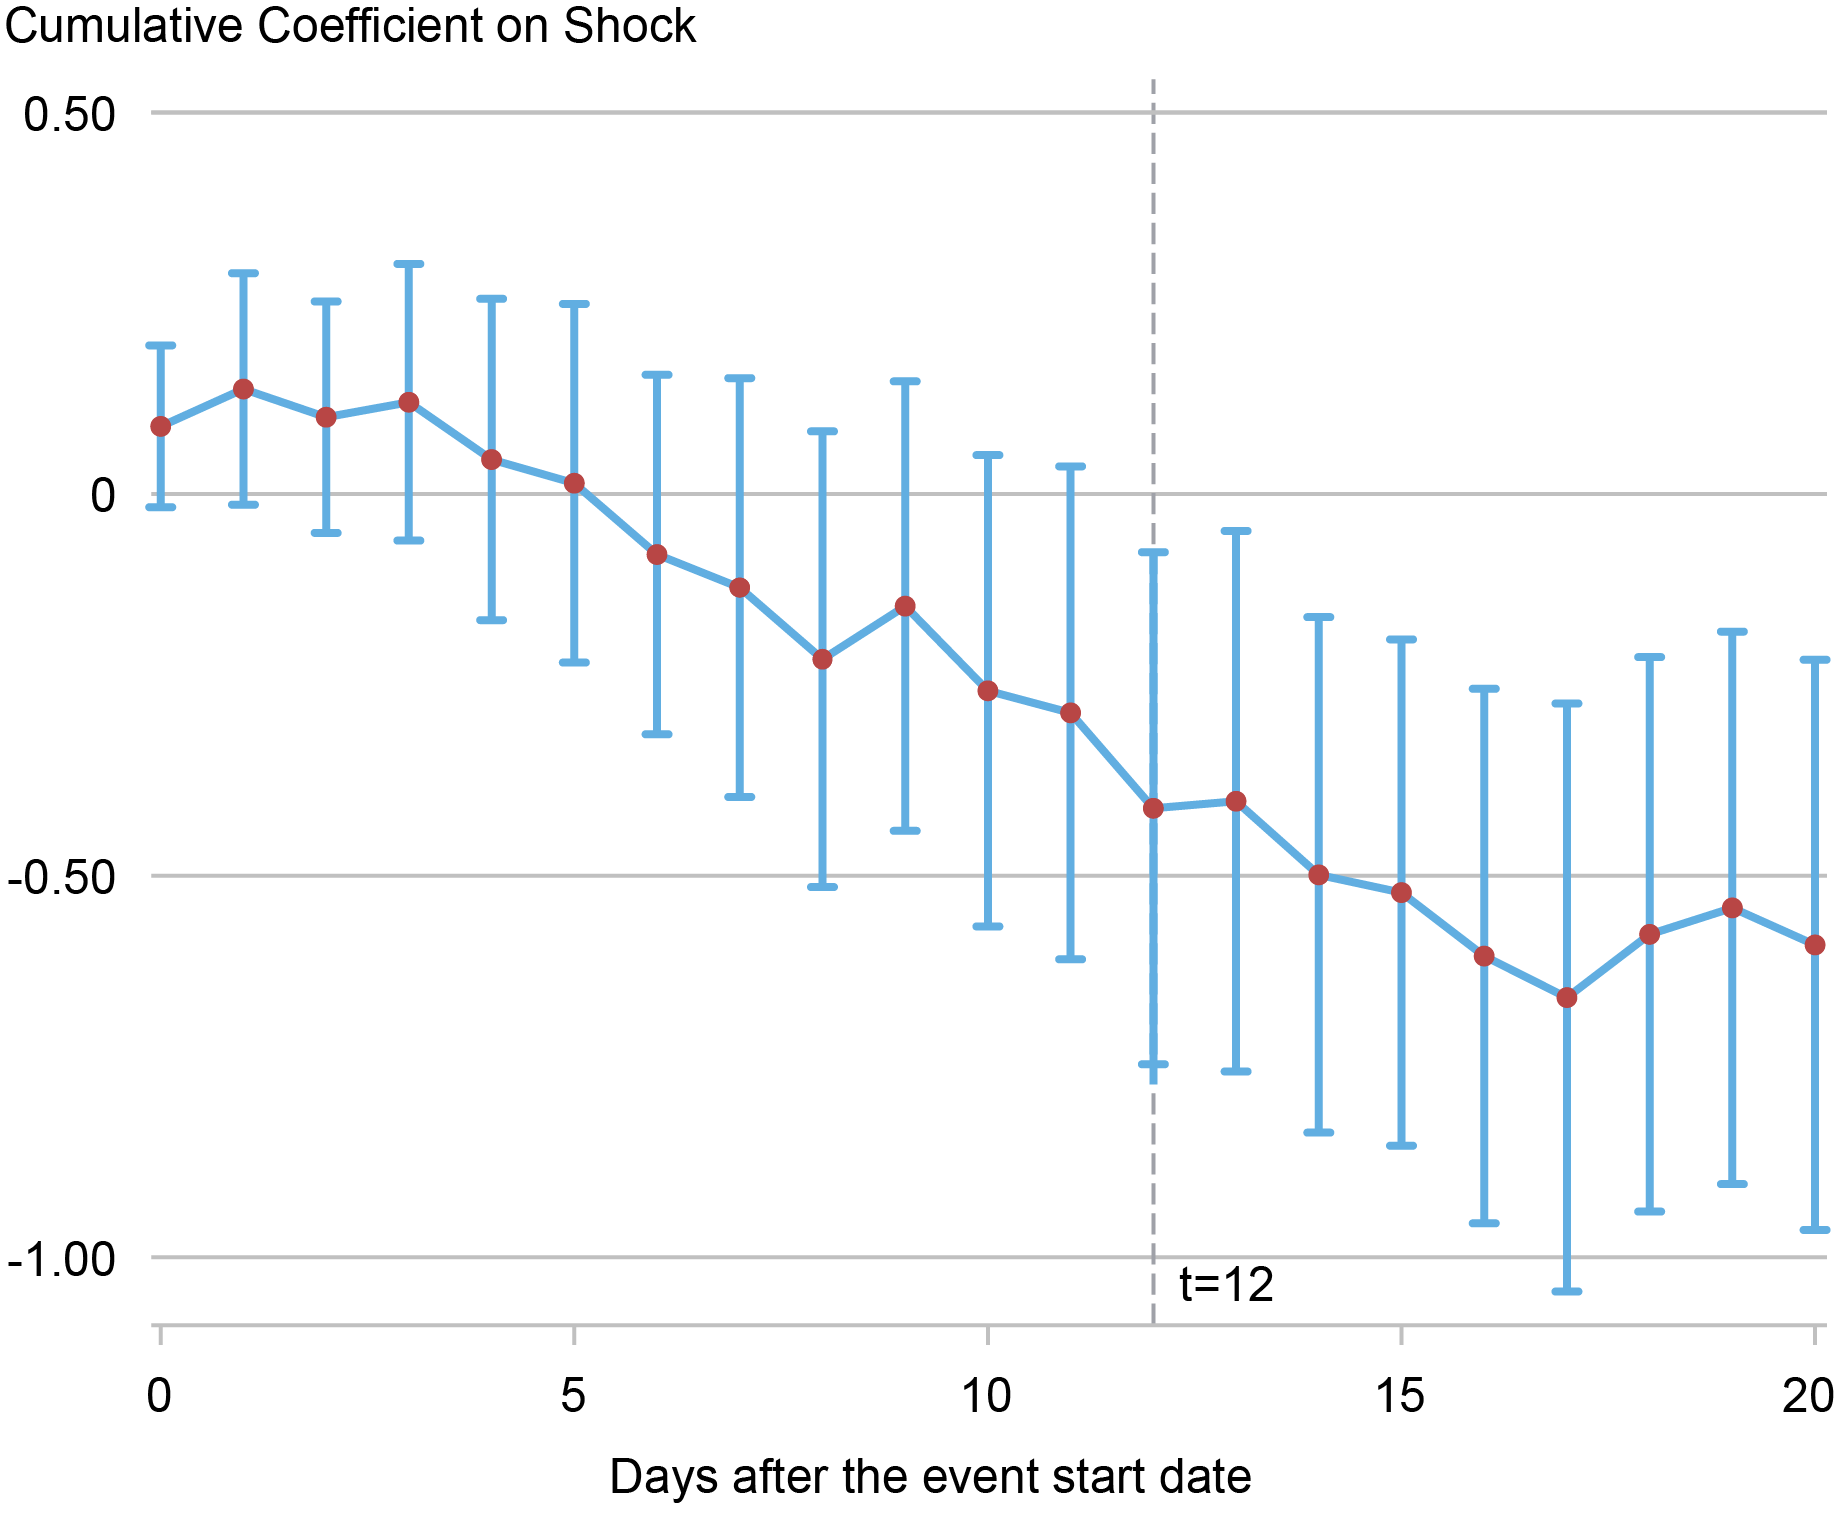 line chart with 95% confidence interval tracking the cumulative coefficient on shock from day 0 to day 20 after the event start date; greatest downward response begins 5 days after the event